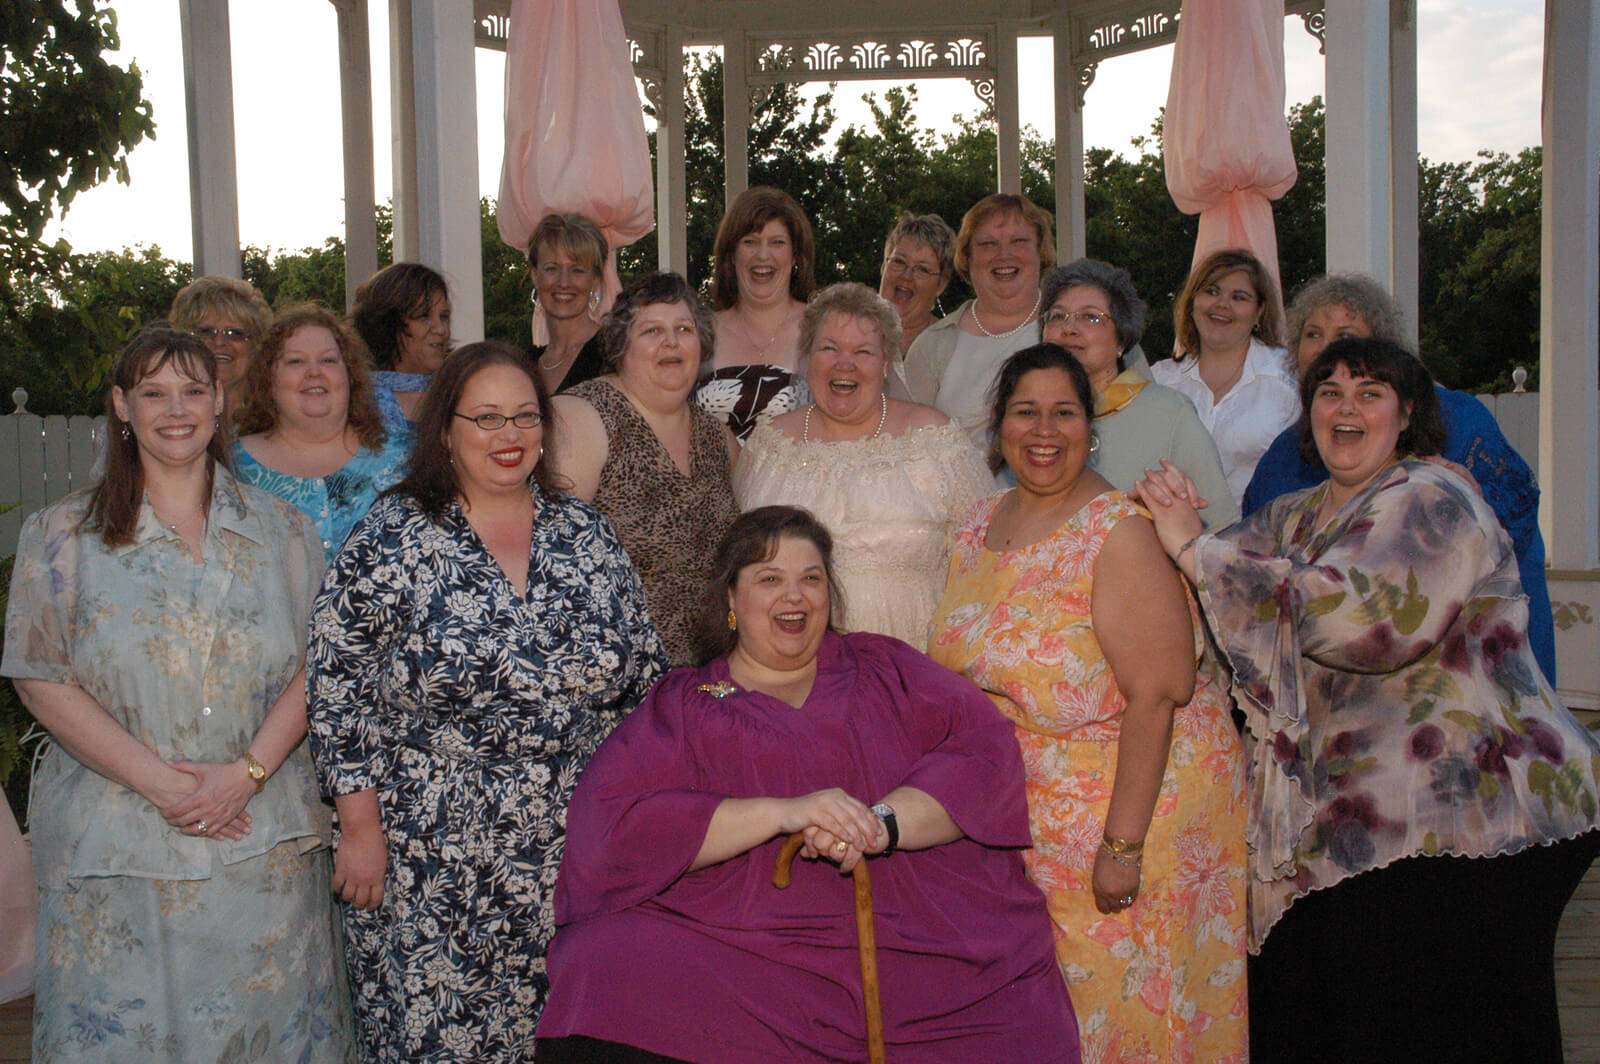 Still from All of Me. Group photo of sixteen women with dresses smiling at the camera.